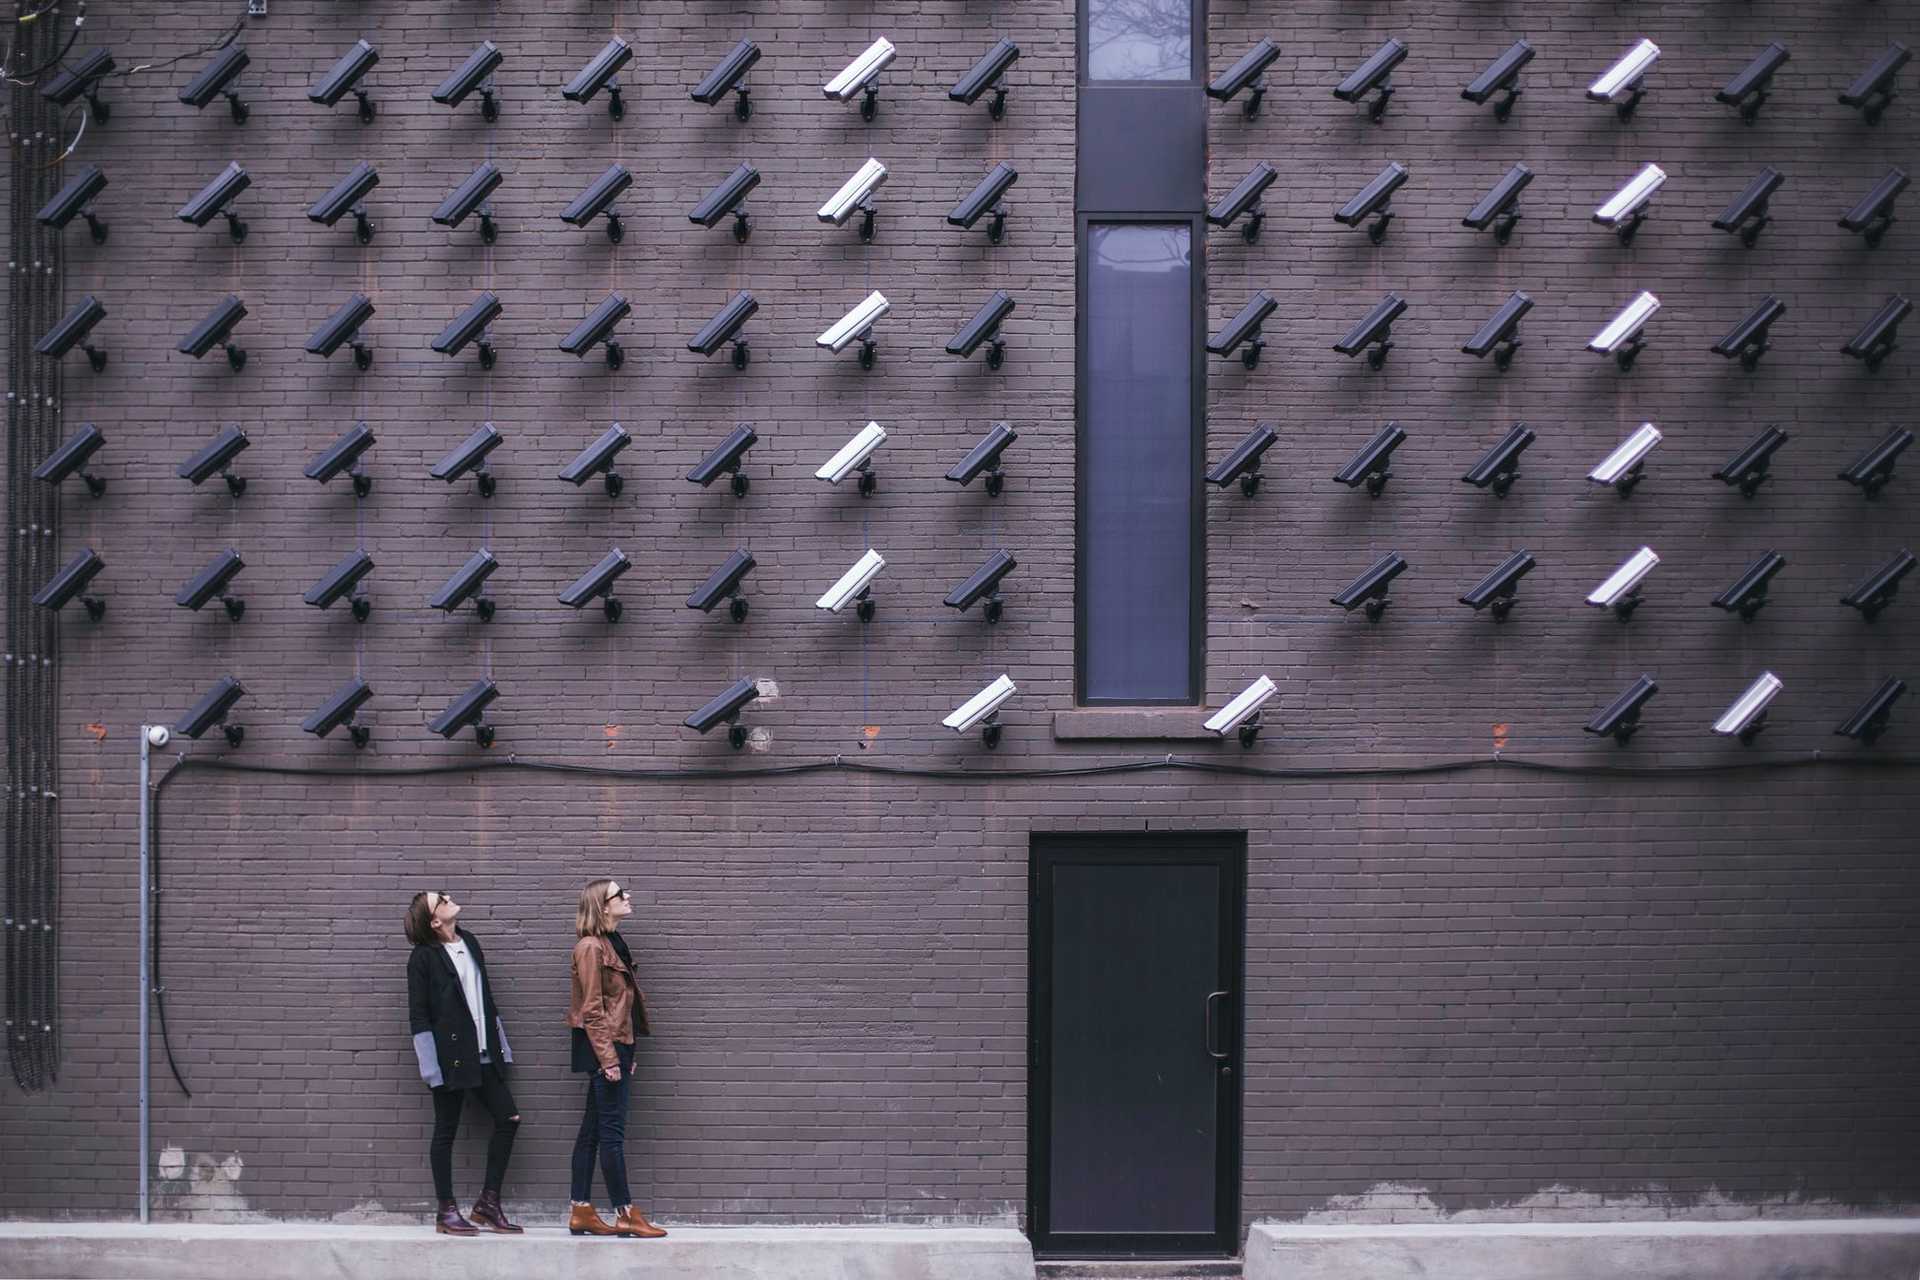 Two people stand in front of a wall full of surveillance cameras.